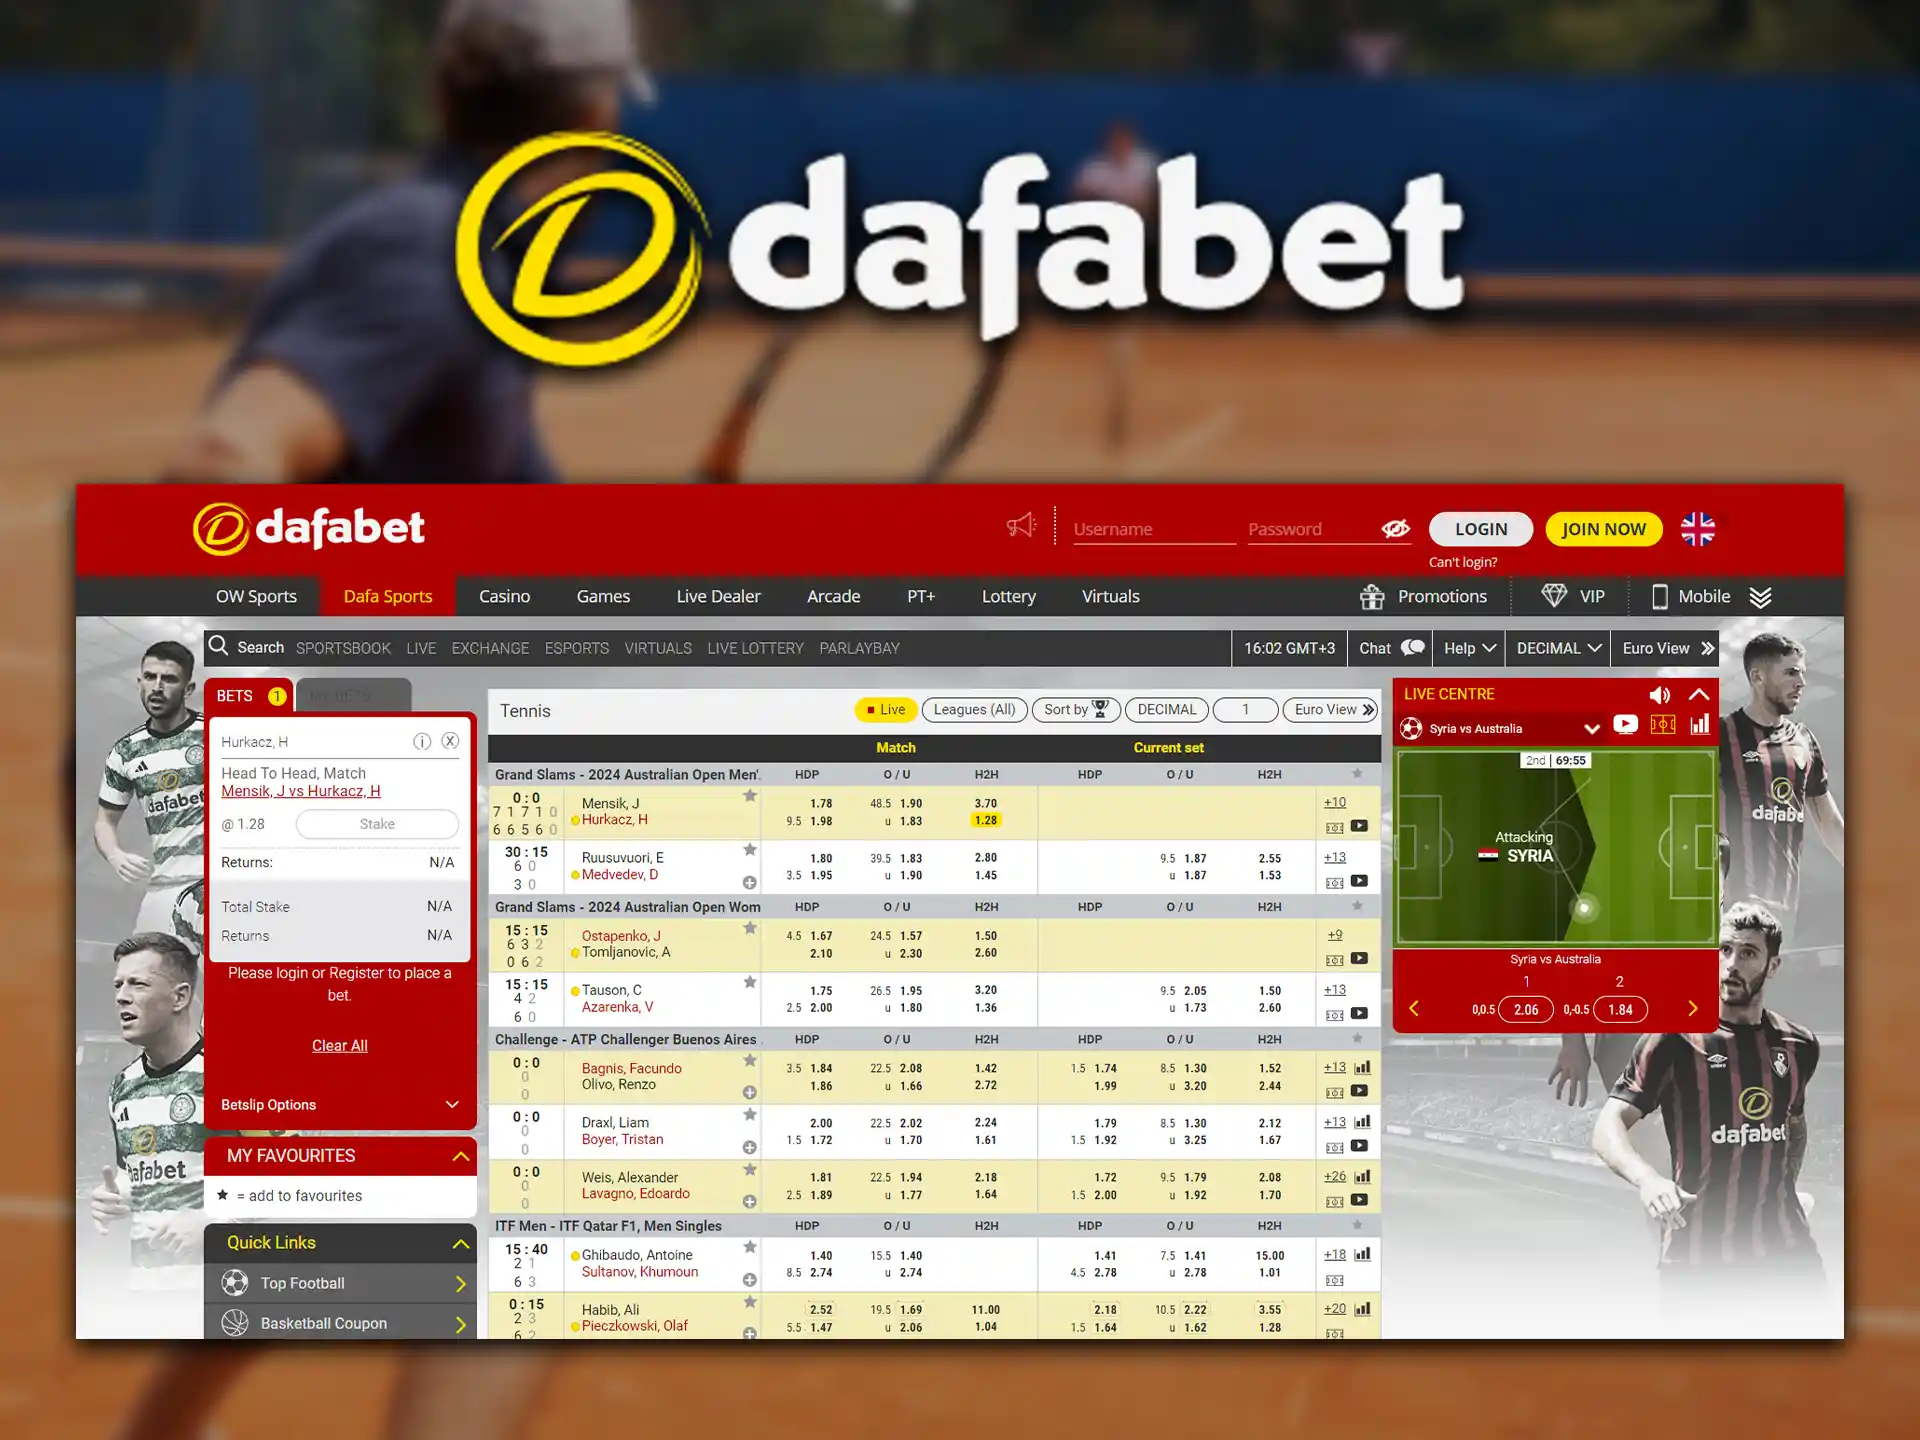 Dafabet is a reliable platform for betting on tennis and other sports.